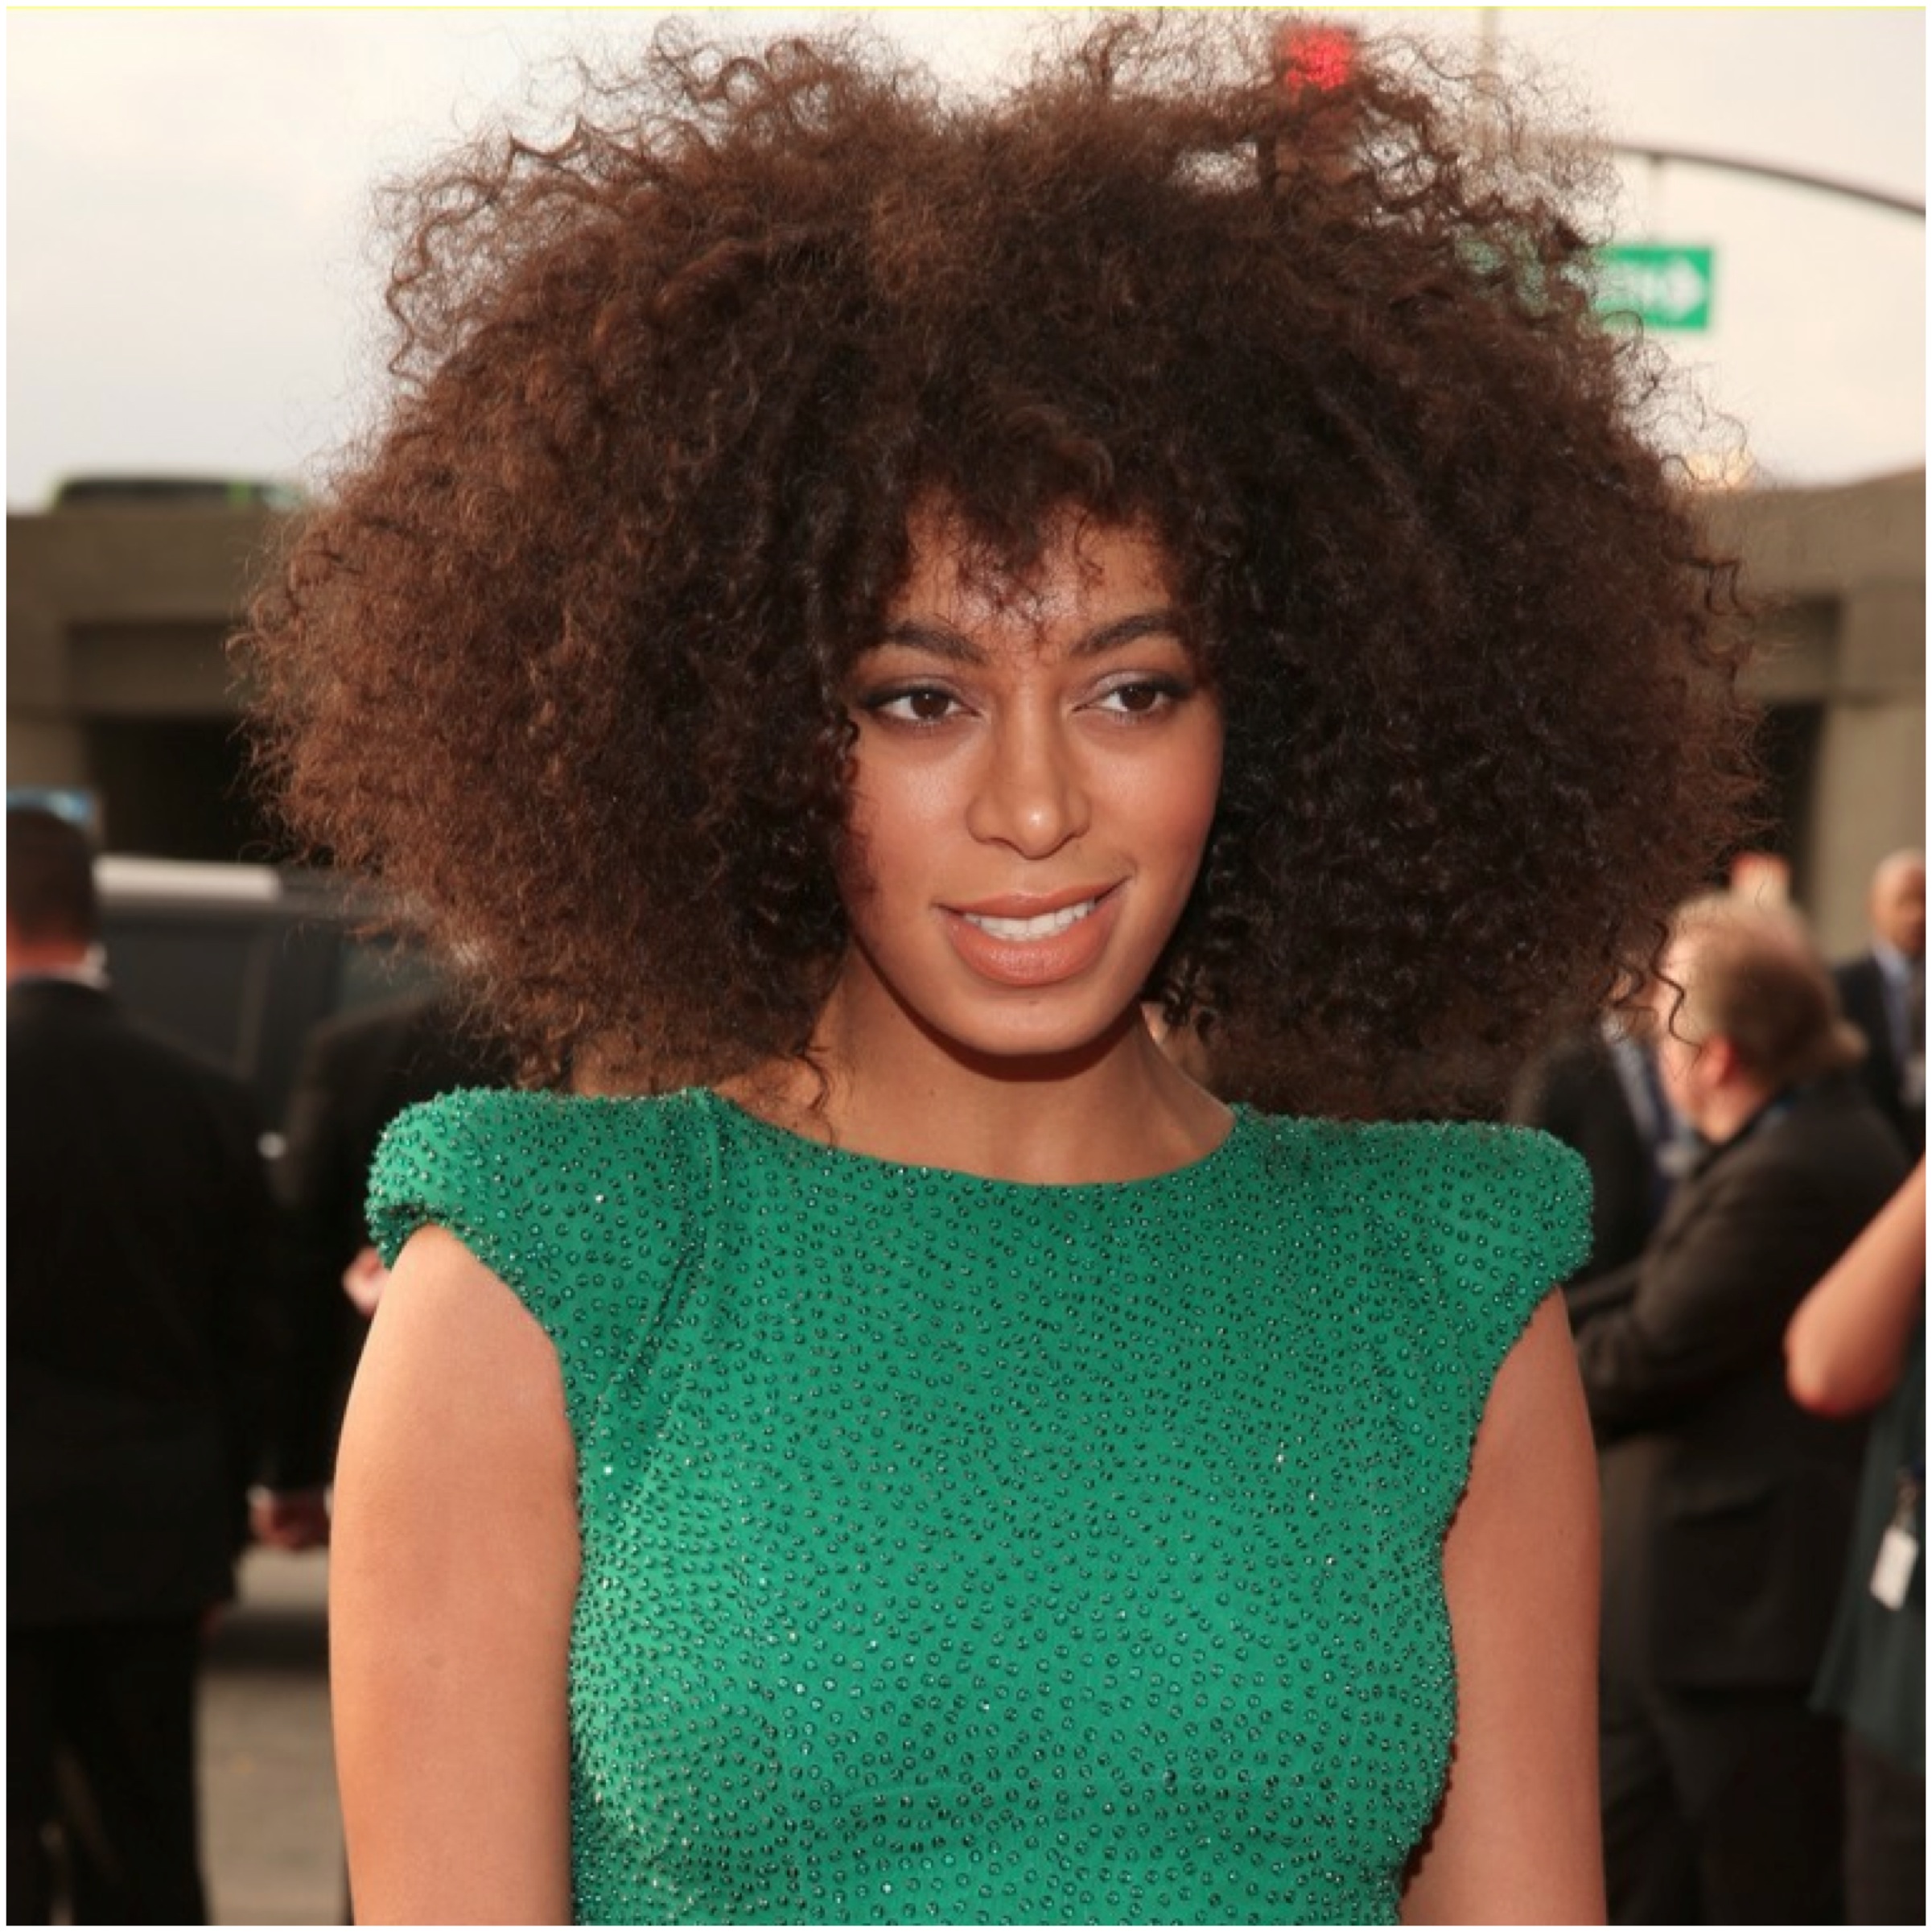 HD Quality Wallpaper | Collection: Music, 2401x2401 Solange Knowles